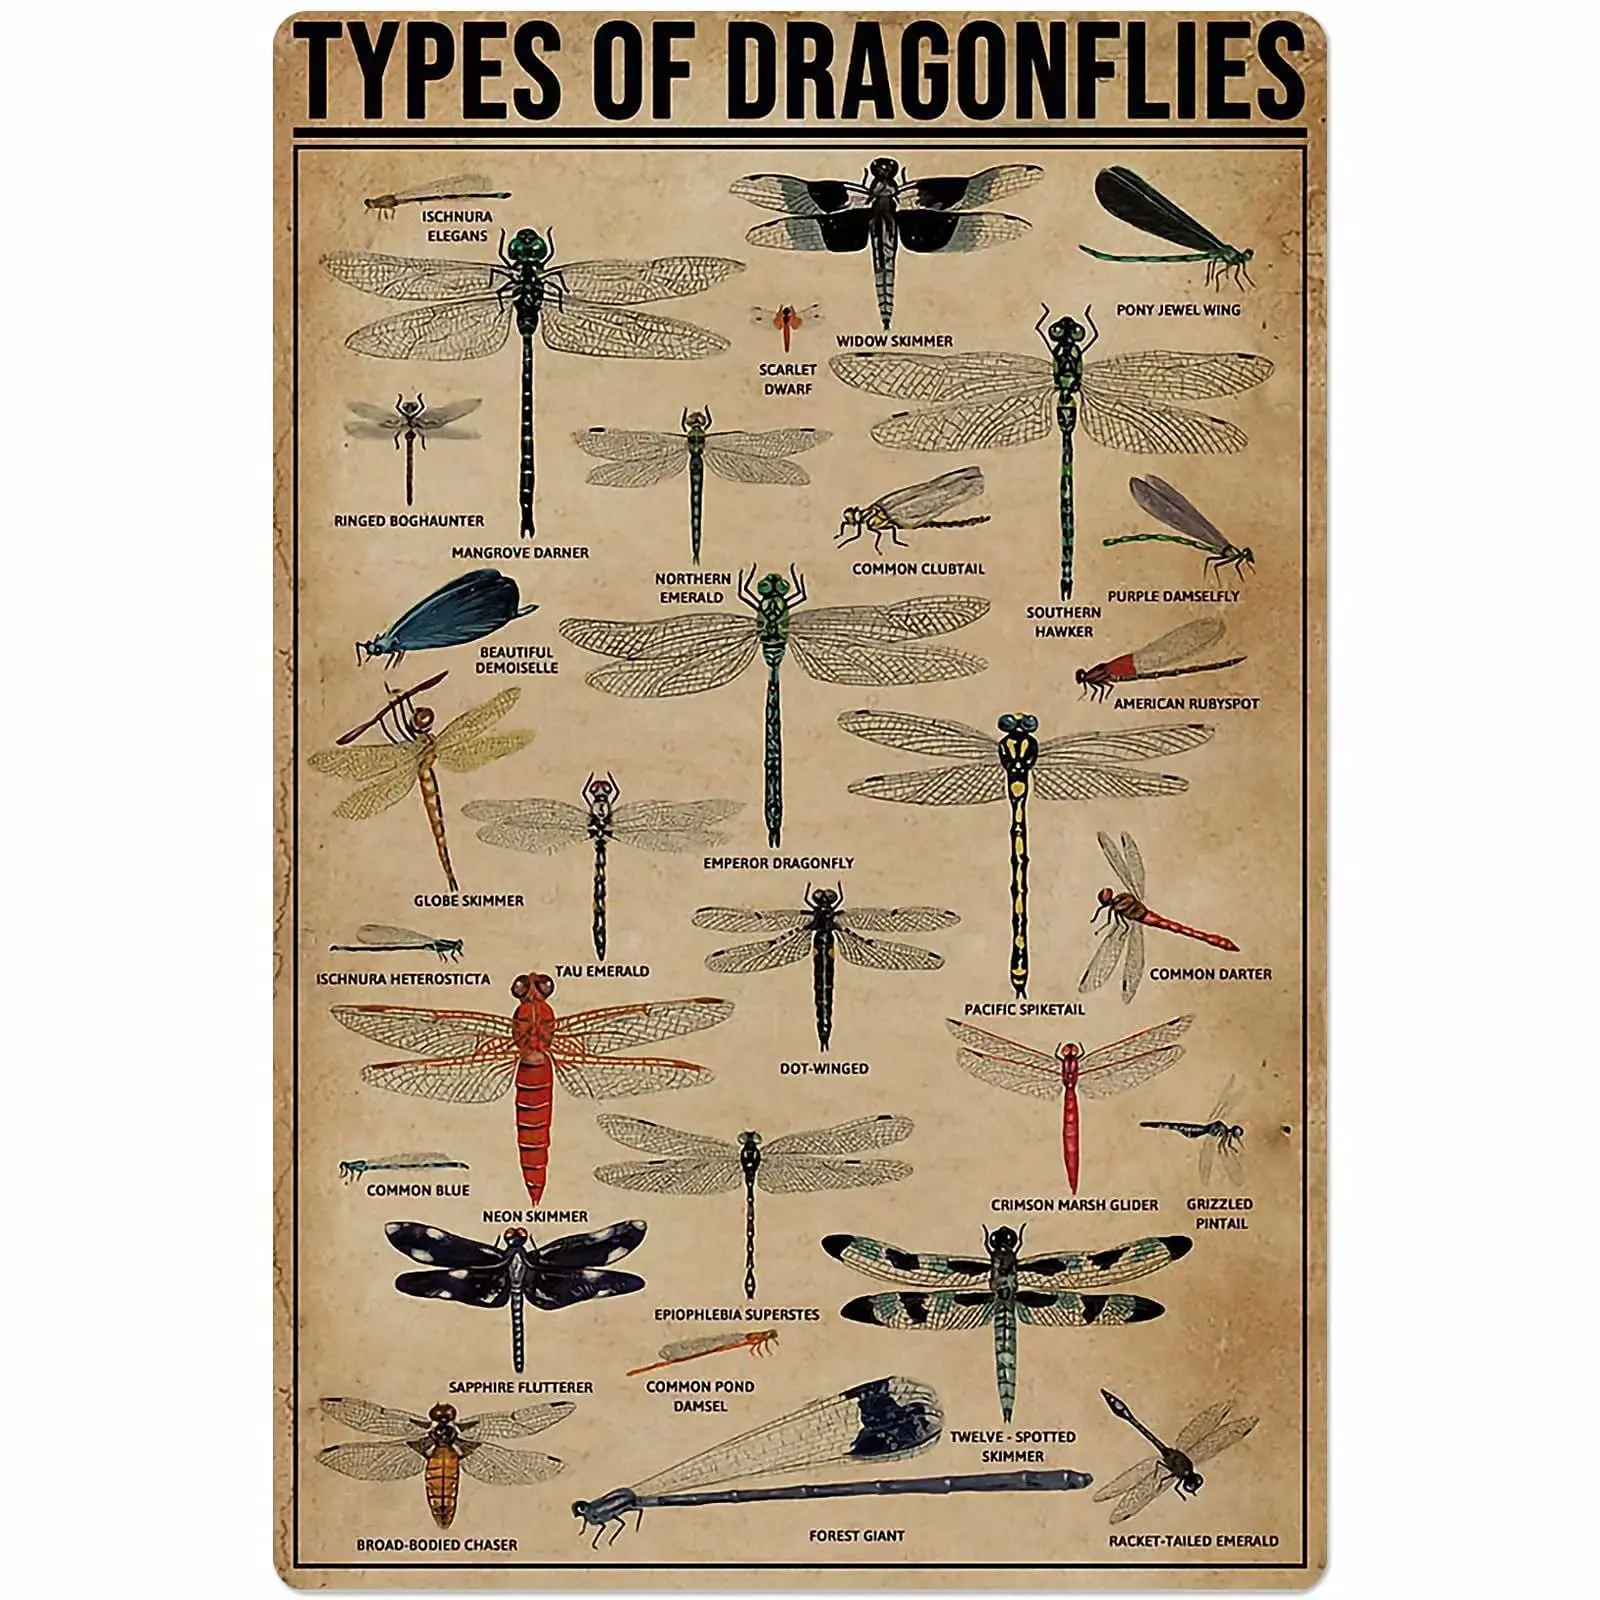 

Veidsuh Types of Dragonflies Metal Signs Printed Knowledge Poster Bar Cafe Decor Home Decor Vintage Wall Decor Club Plaques